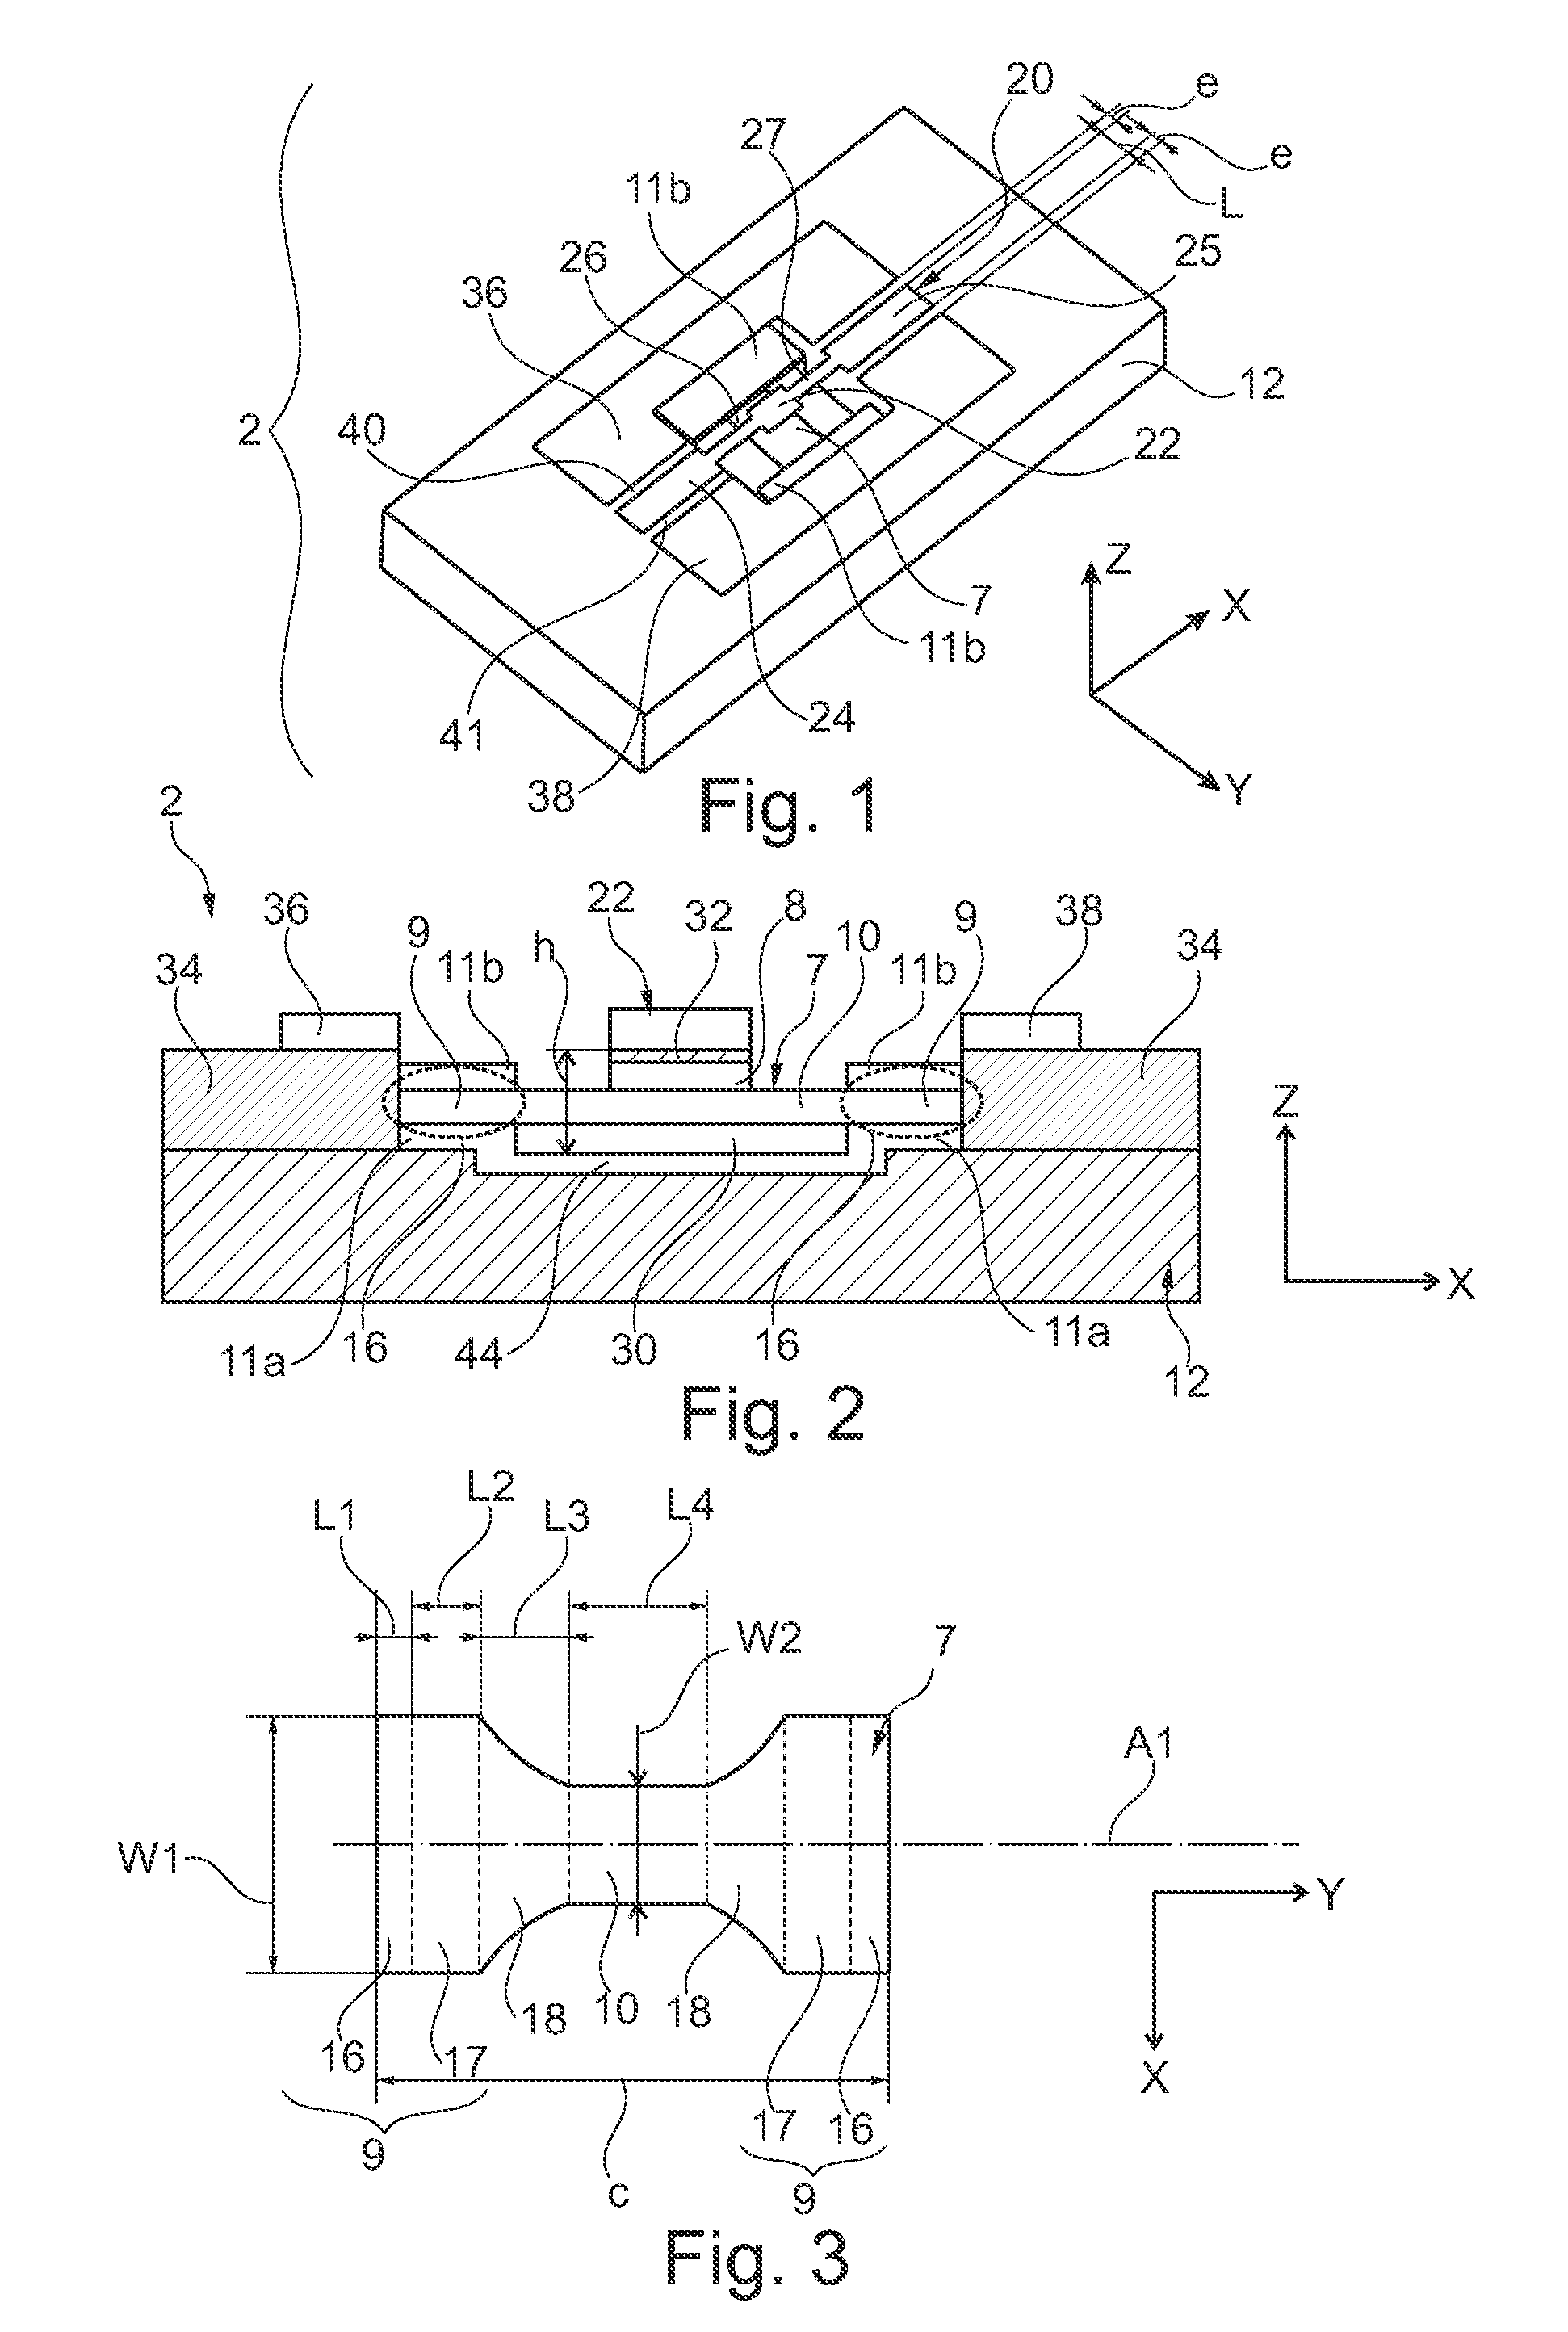 Variable-response magnetic radiofrequency device